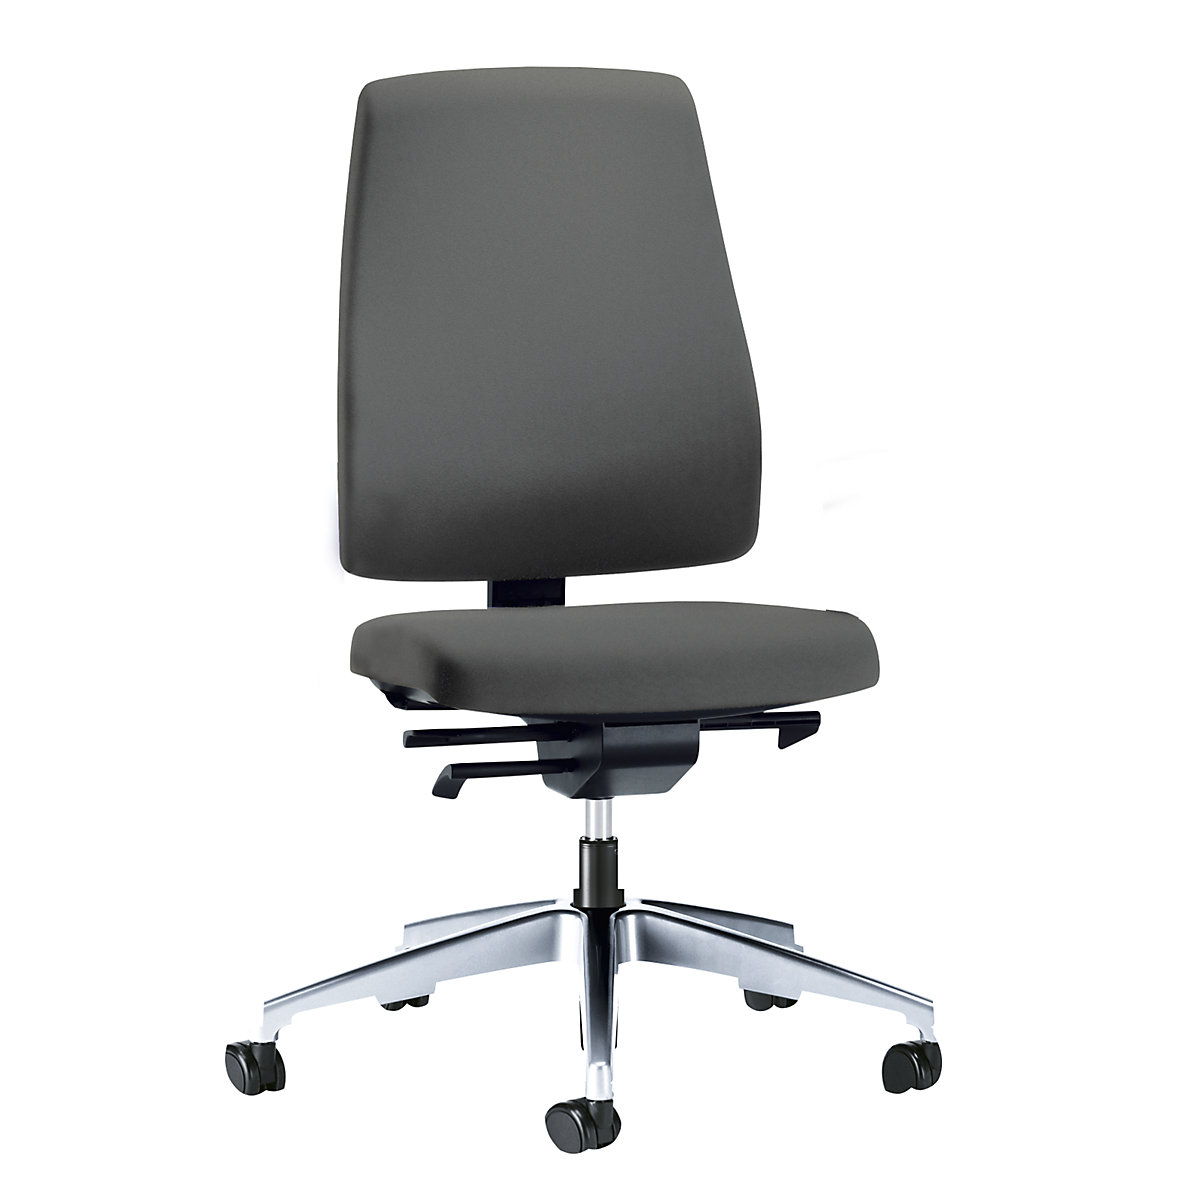 GOAL office swivel chair, back rest height 530 mm – interstuhl, polished frame, with soft castors, iron grey, seat depth 410 mm-3